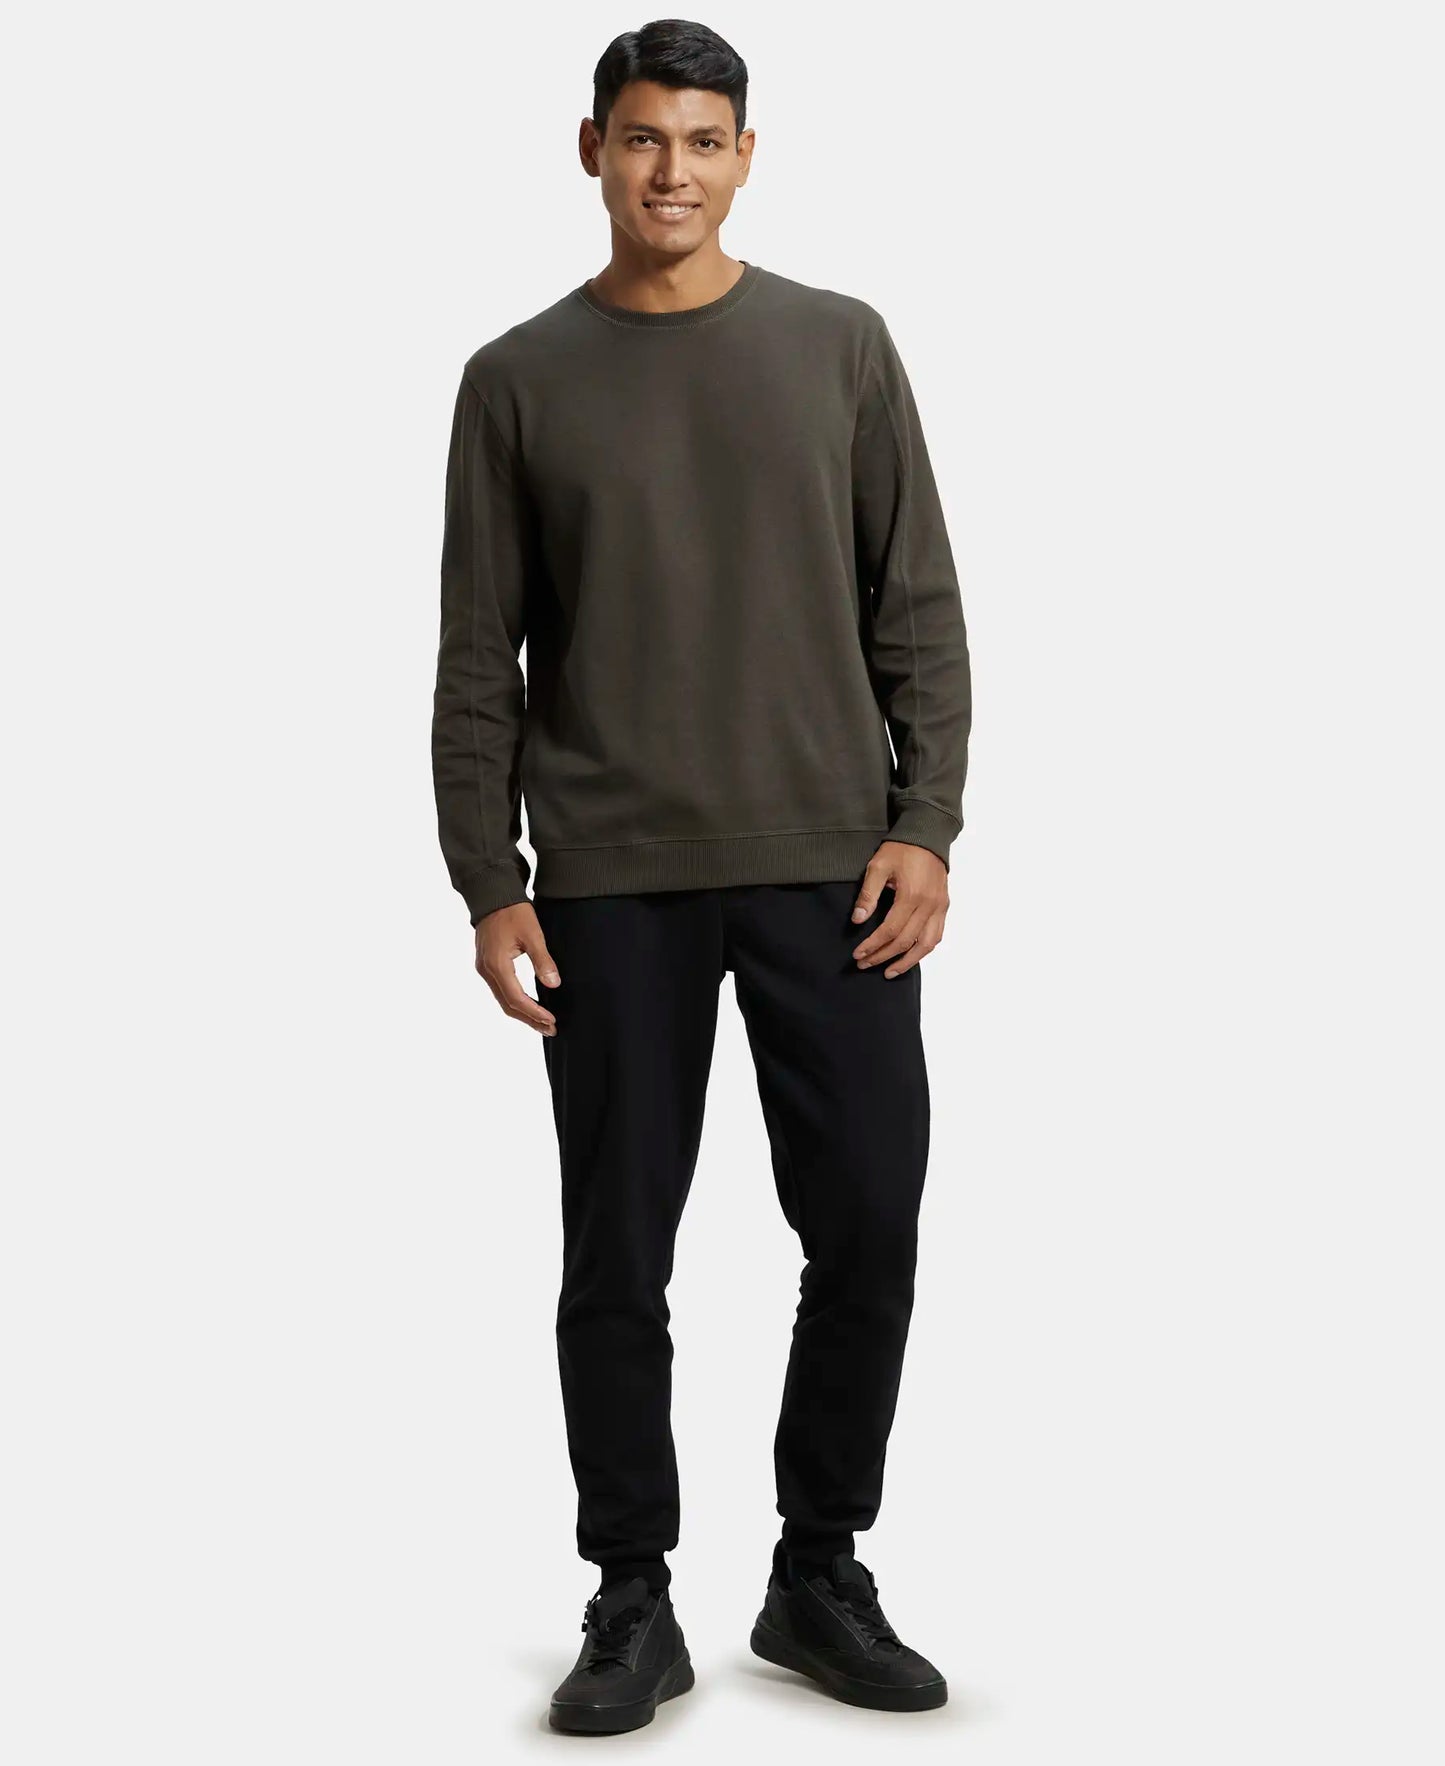 Super Combed Cotton Rich Pique Sweatshirt with Ribbed Cuffs - Black Olive-4